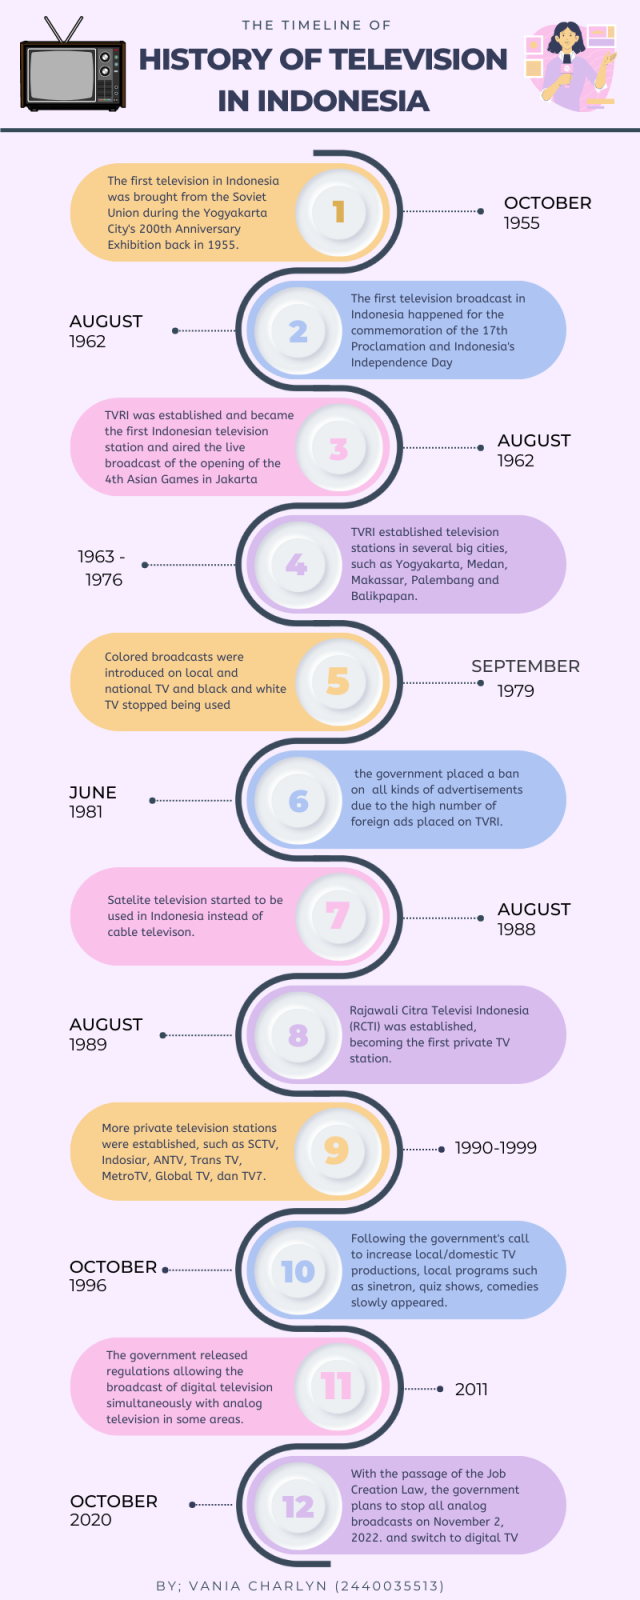 A timeline of the development of television in Indonesia